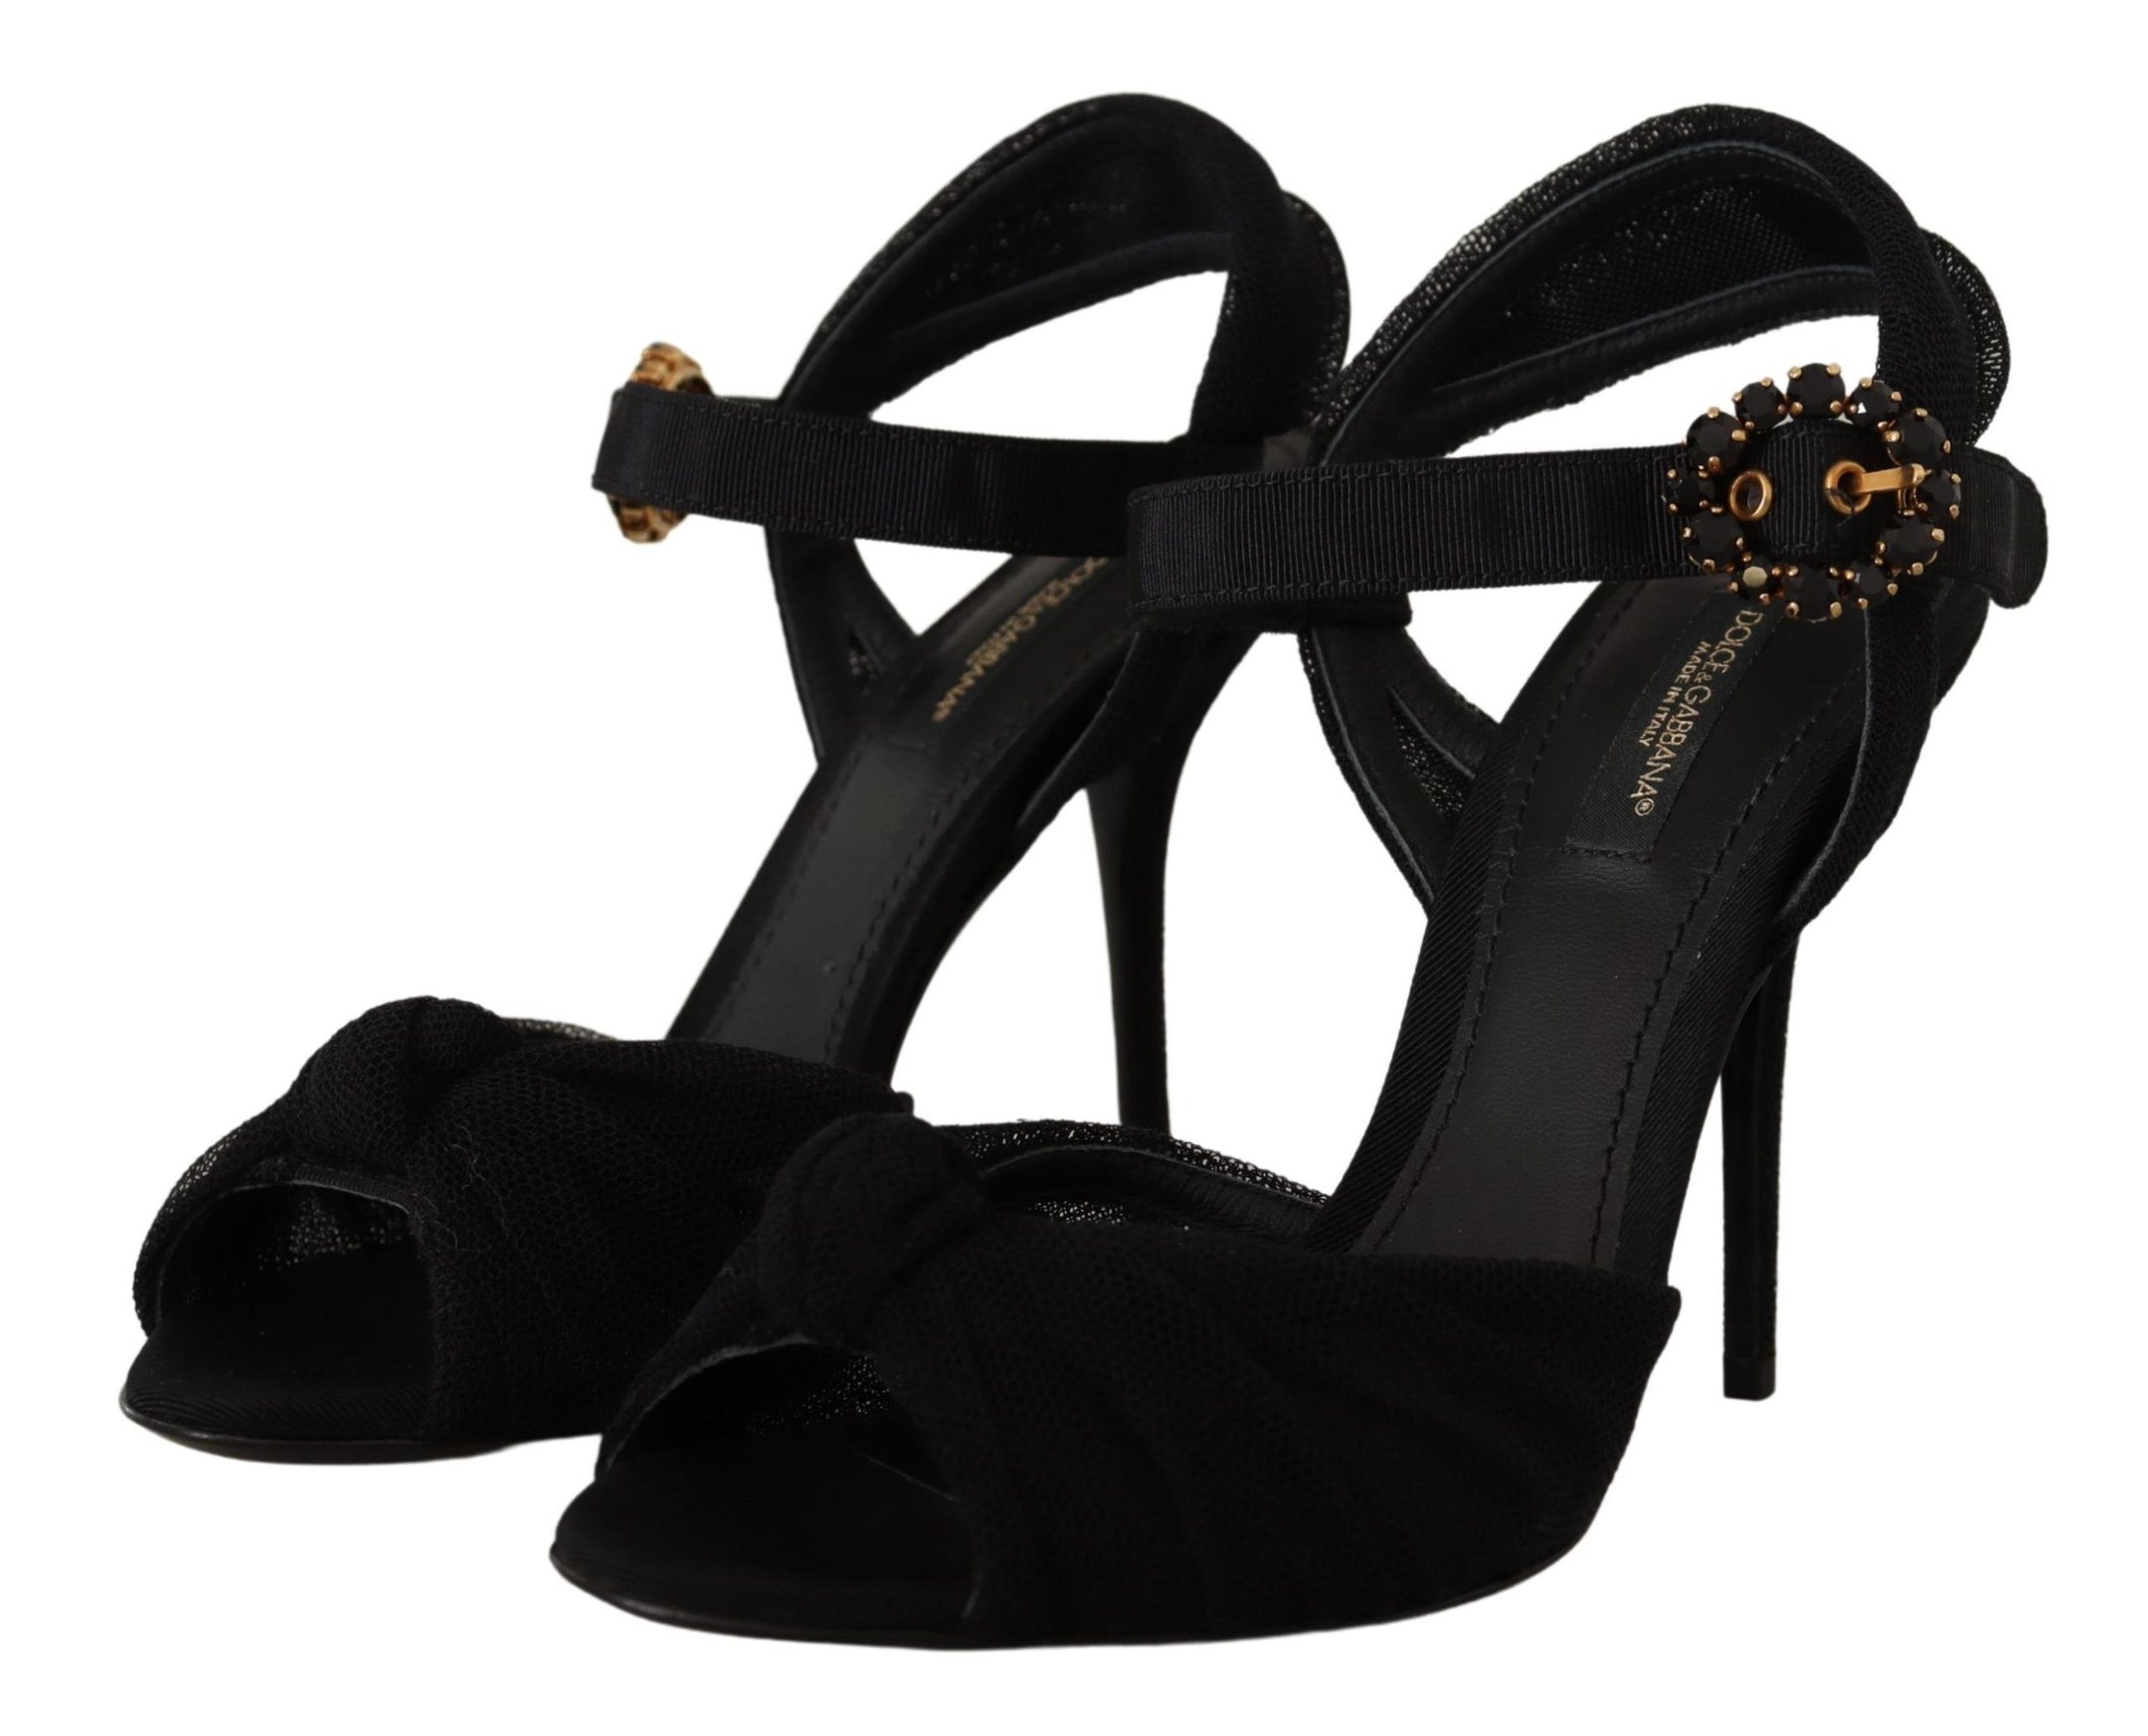 Black Tulle Ankle Strap Heels with Crystal Buckle